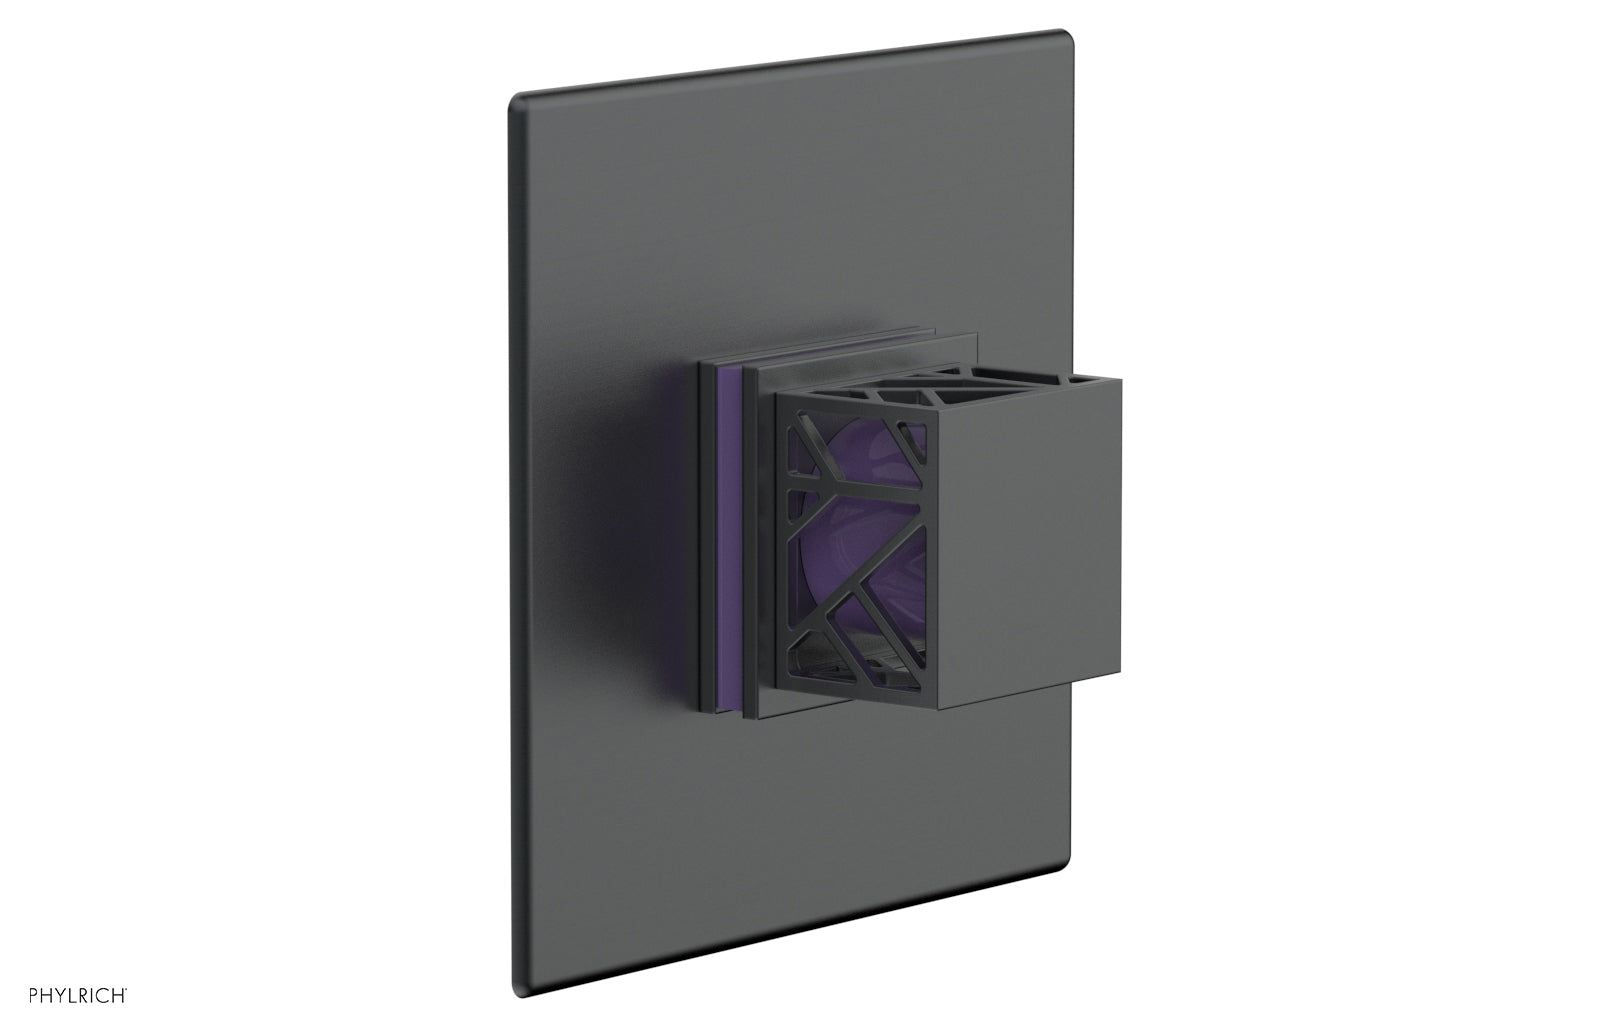 Phylrich JOLIE Thermostatic Shower Trim, Square Handle with "Purple" Accents